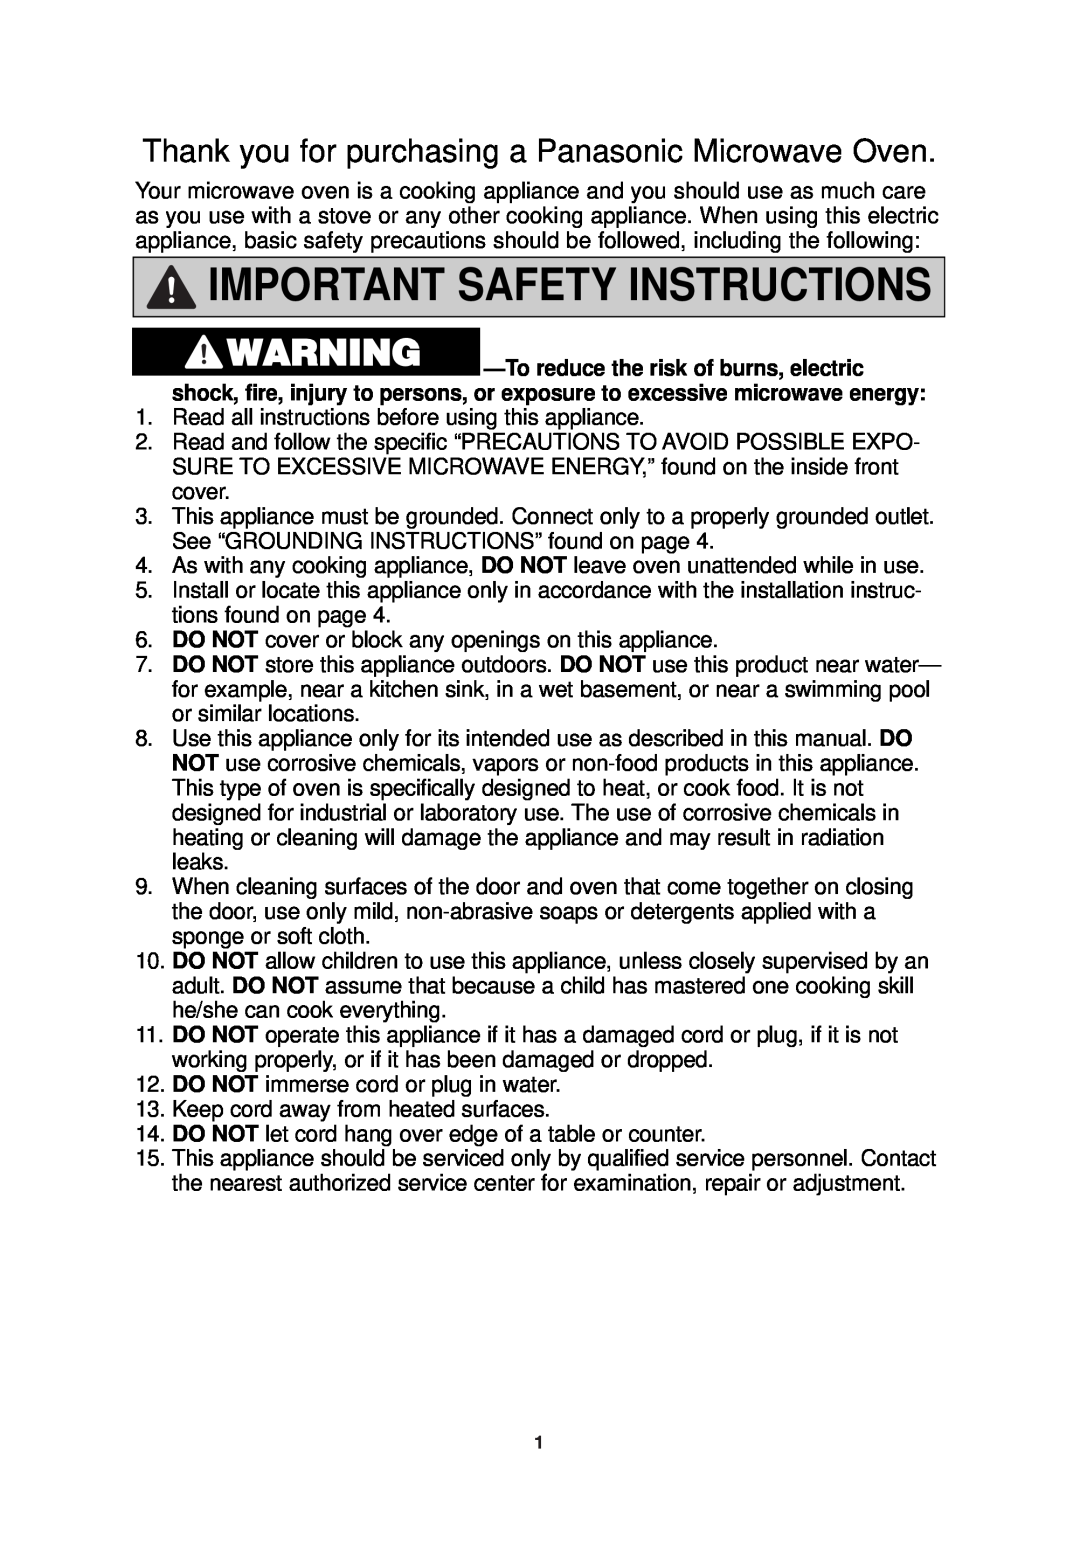 Panasonic NN-SN960S Important Safety Instructions, Thank you for purchasing a Panasonic Microwave Oven 